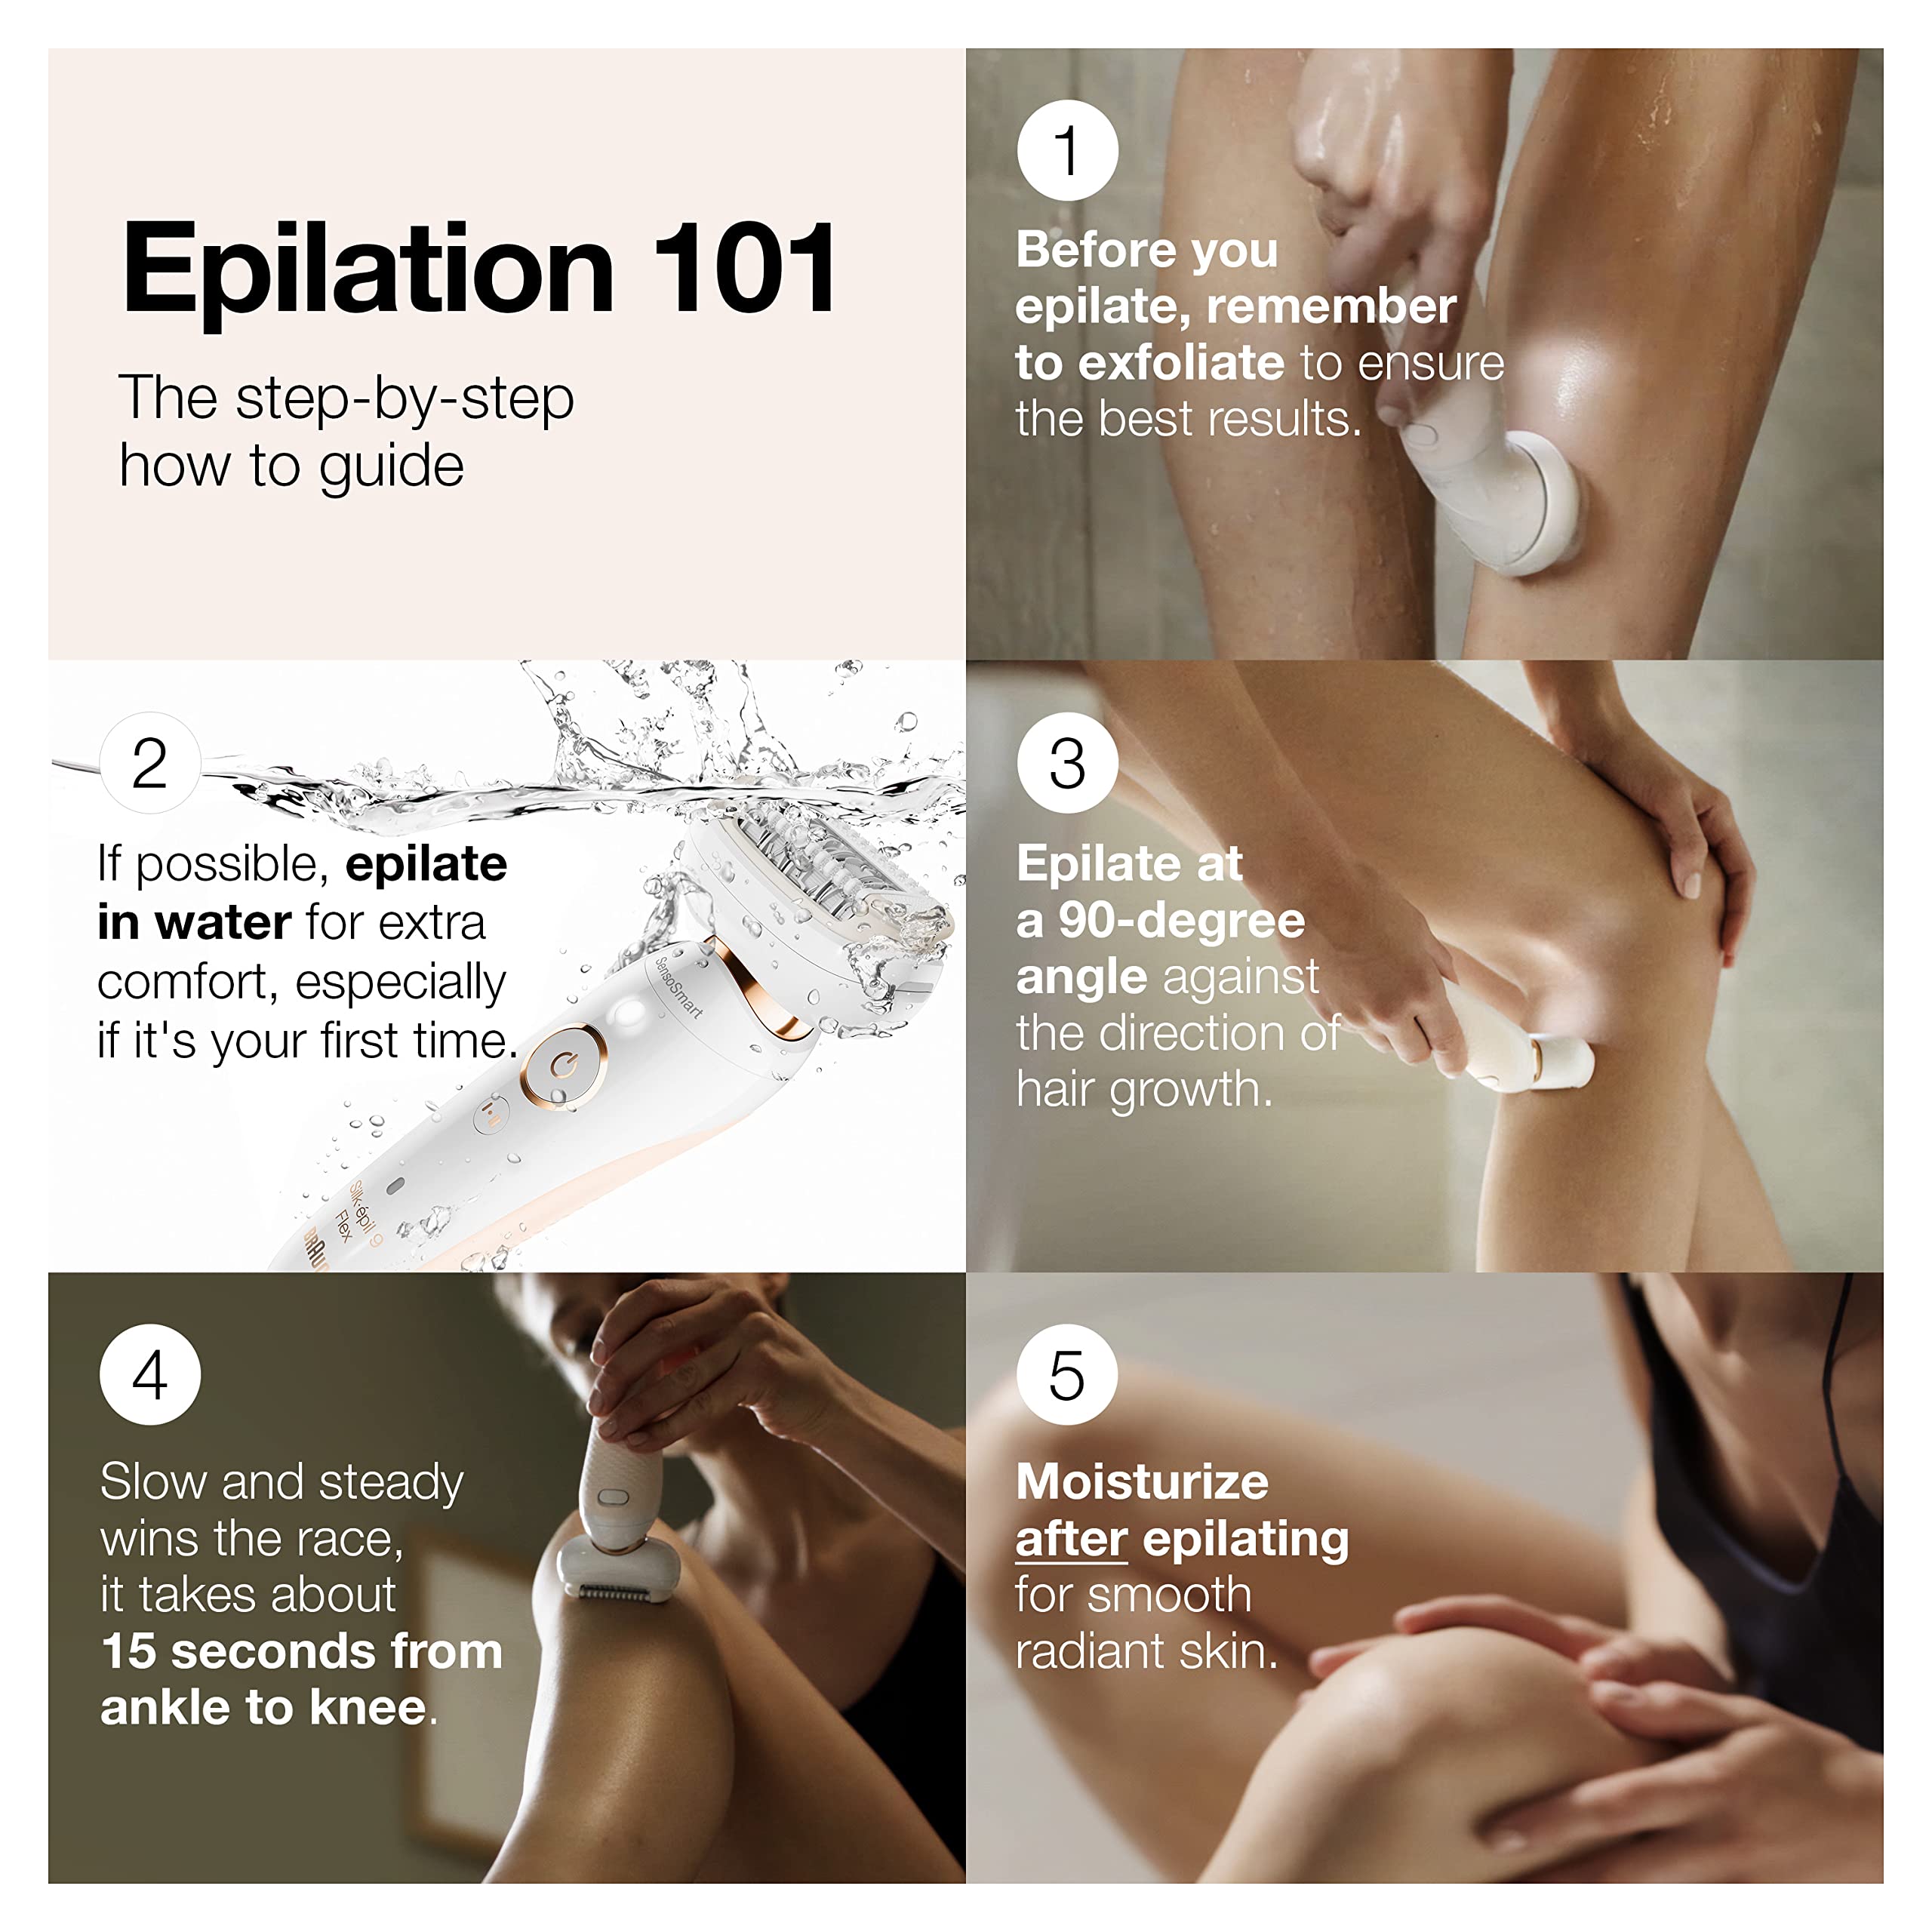 Braun Epilator Silk-épil 9 9-030 with Flexible Head, Facial Hair Removal for Women and Men, Hair Removal Device, Shaver & Trimmer, Cordless, Rechargeable, Wet & Dry, Beauty Kit with Body Massage Pad